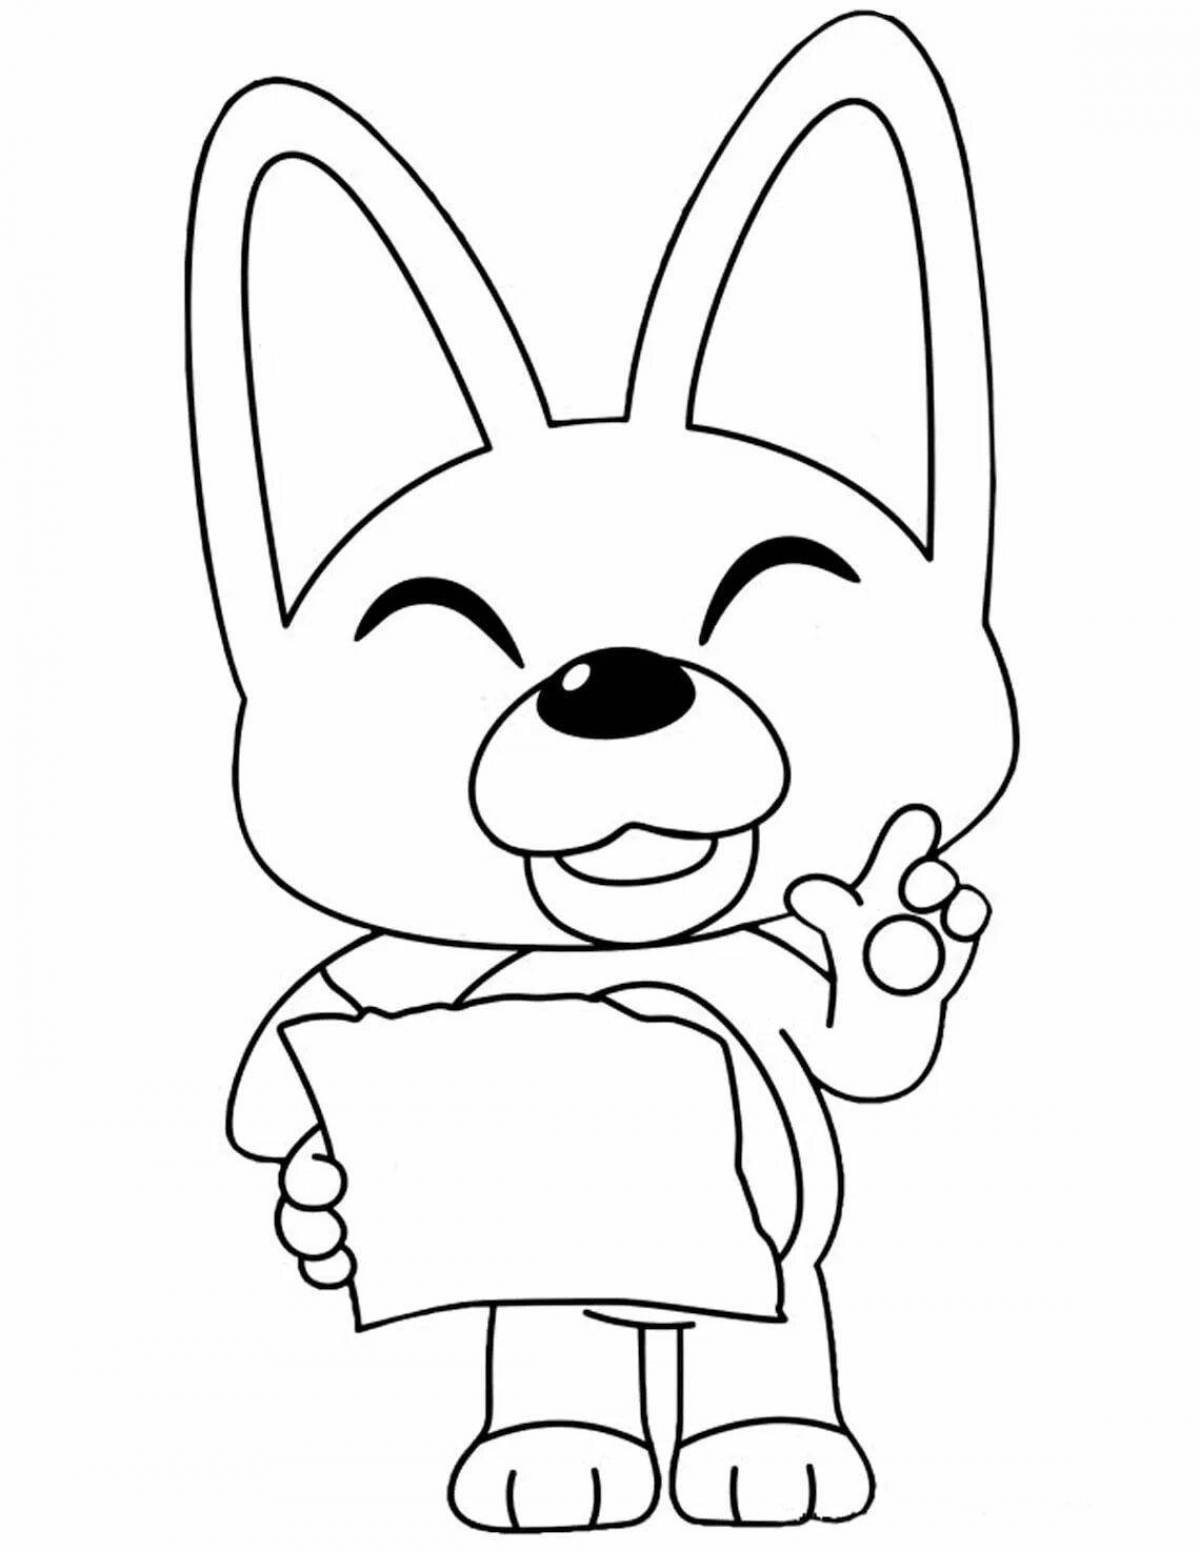 Eddie coloring page with rich color